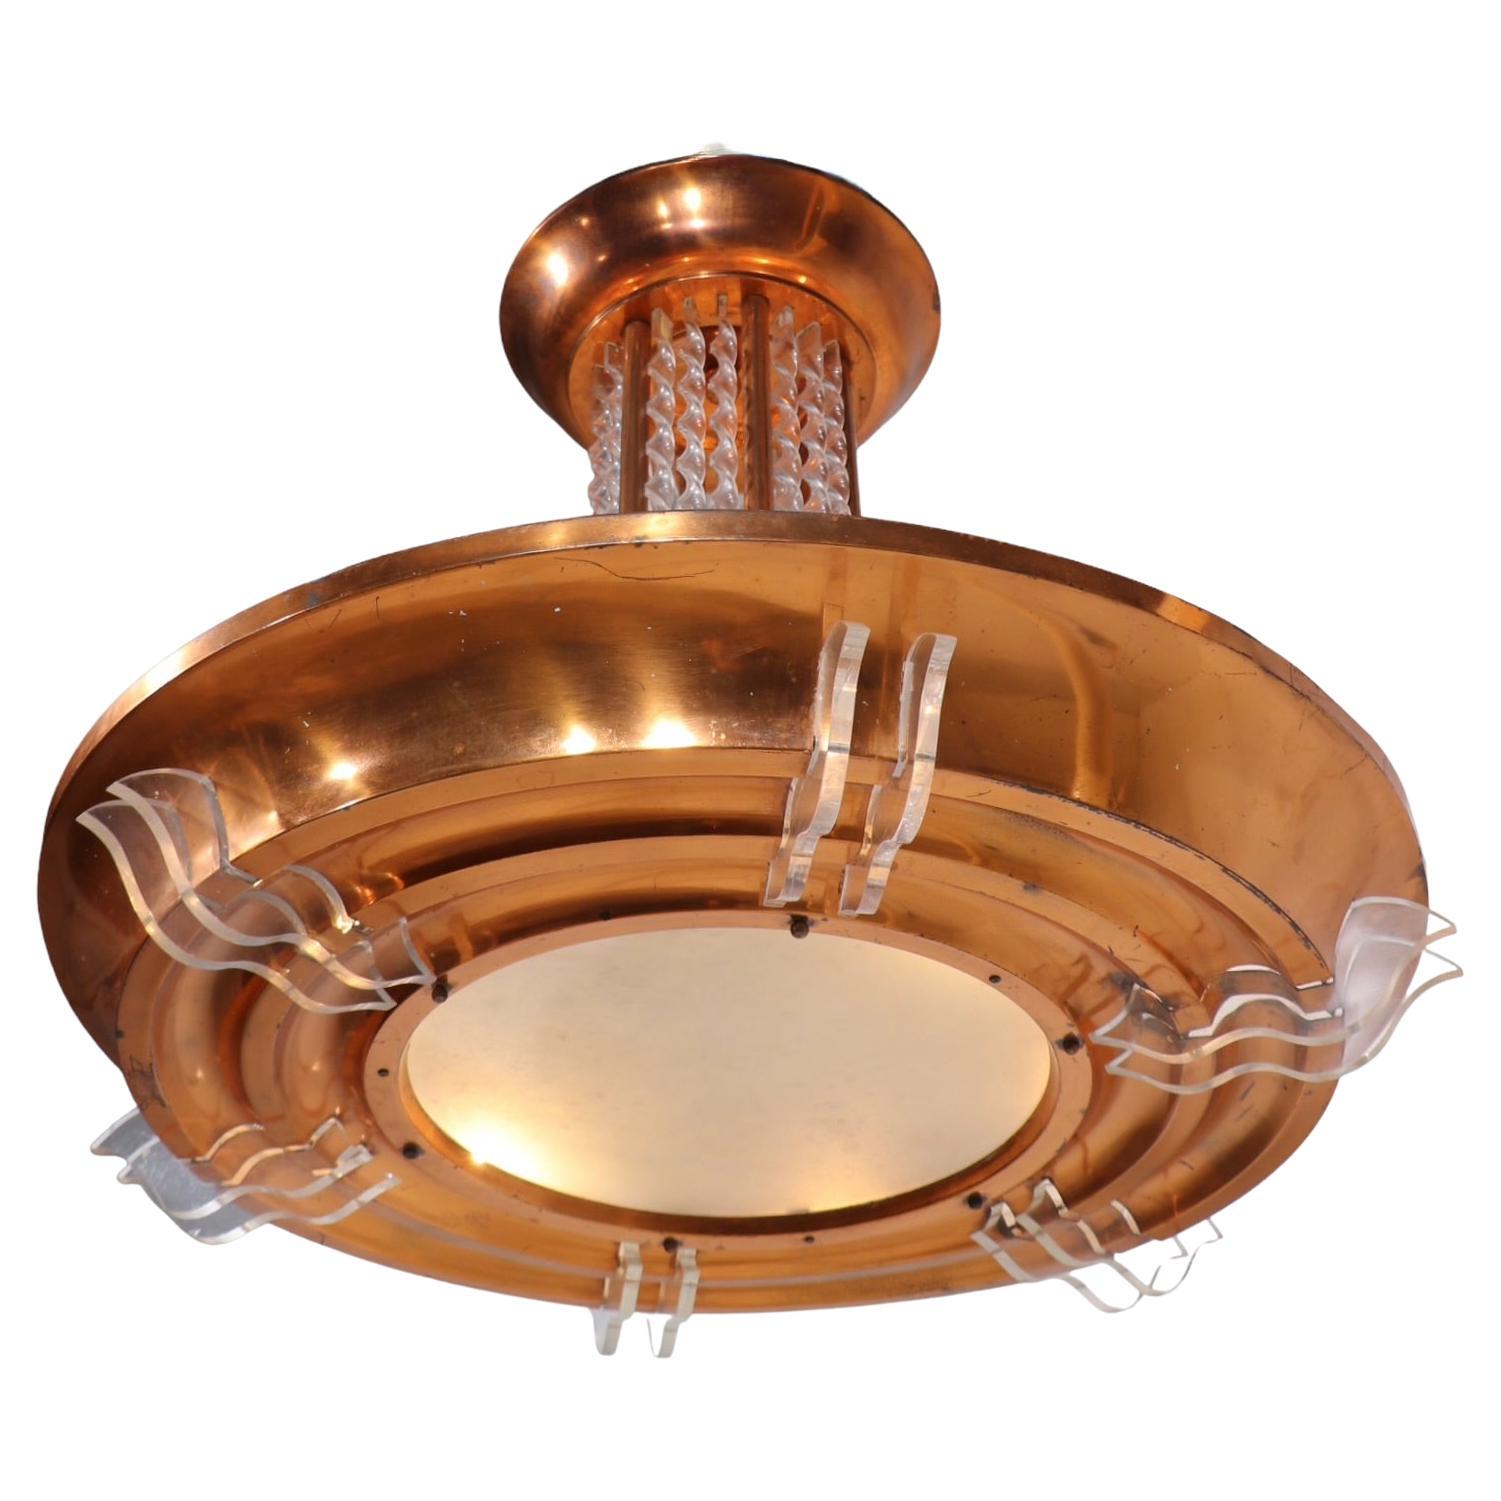 Large Art Deco Copper and Lucite Chandelier, circa 1930s